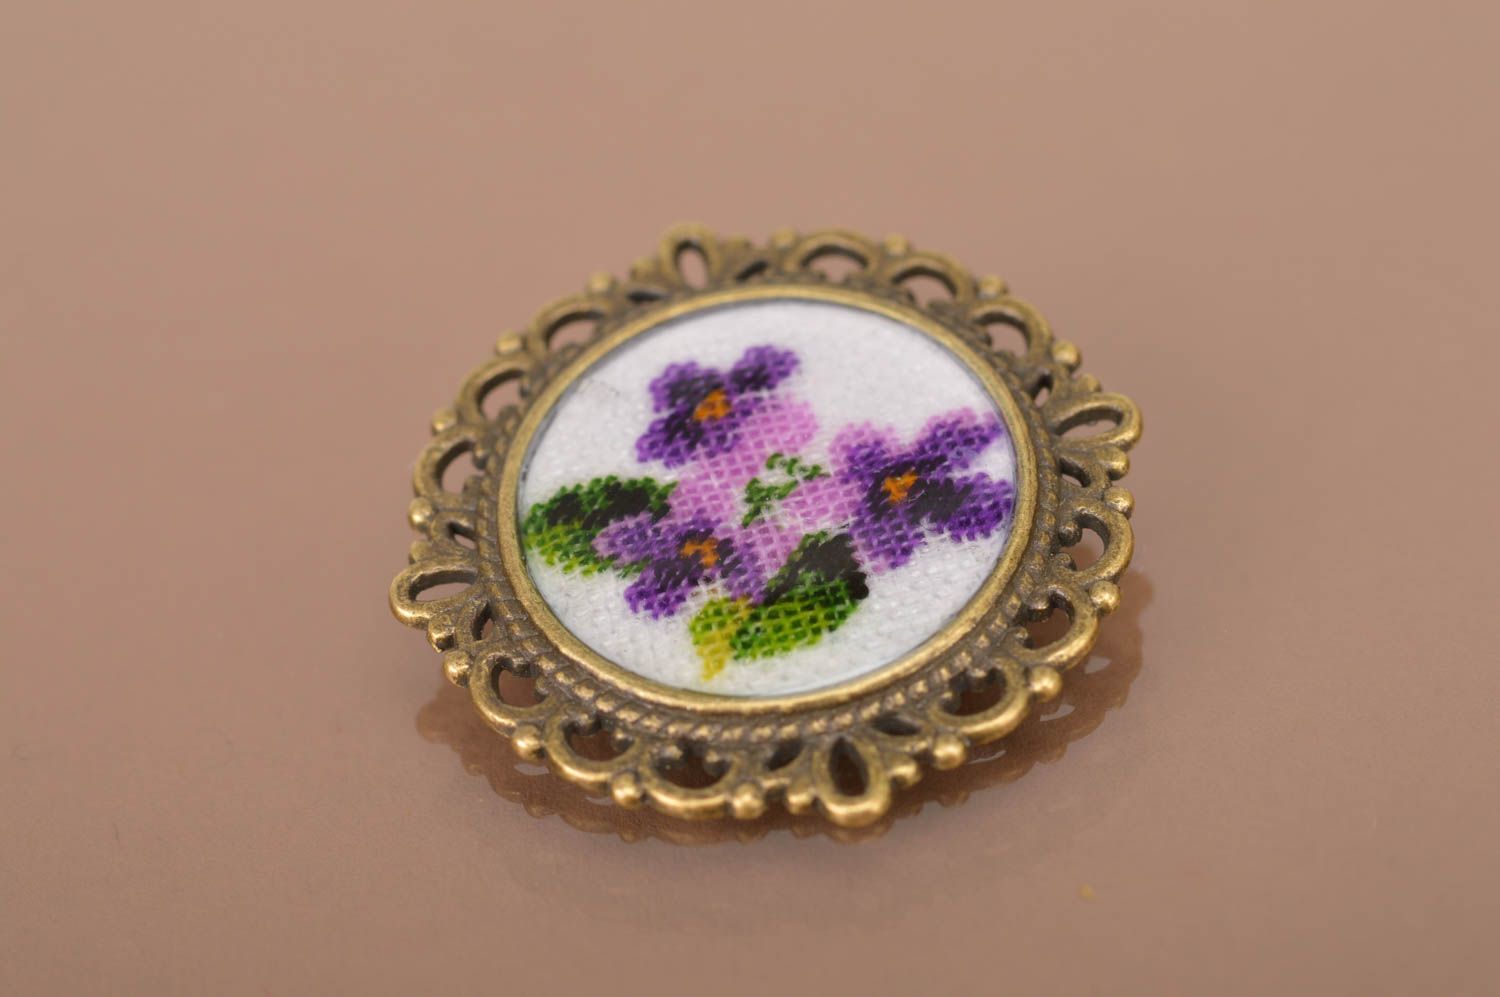 Brooch handmade unique jewelry fashion accessories best gifts for women photo 2